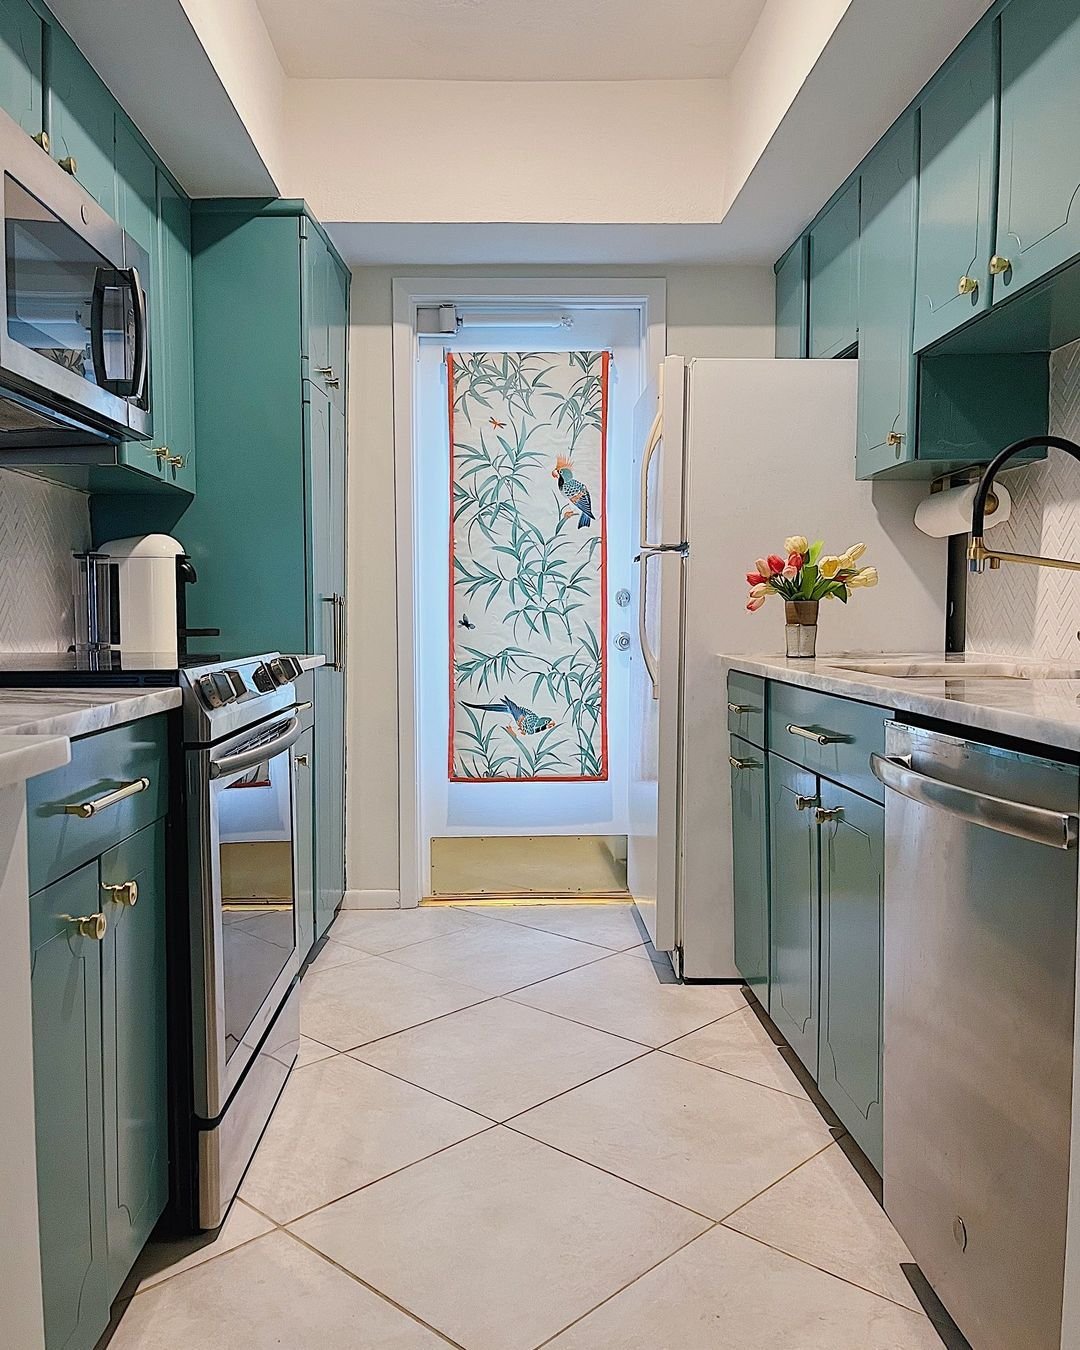 Once upon a time, this kitchen was a drab vintage relic from the 60&rsquo;s, lacking the personality and vibrancy that truly felt like home. The cabinets needed a bold, fresh color to take them from sad and dreary to charming and whimsical 🎨💚 Its a